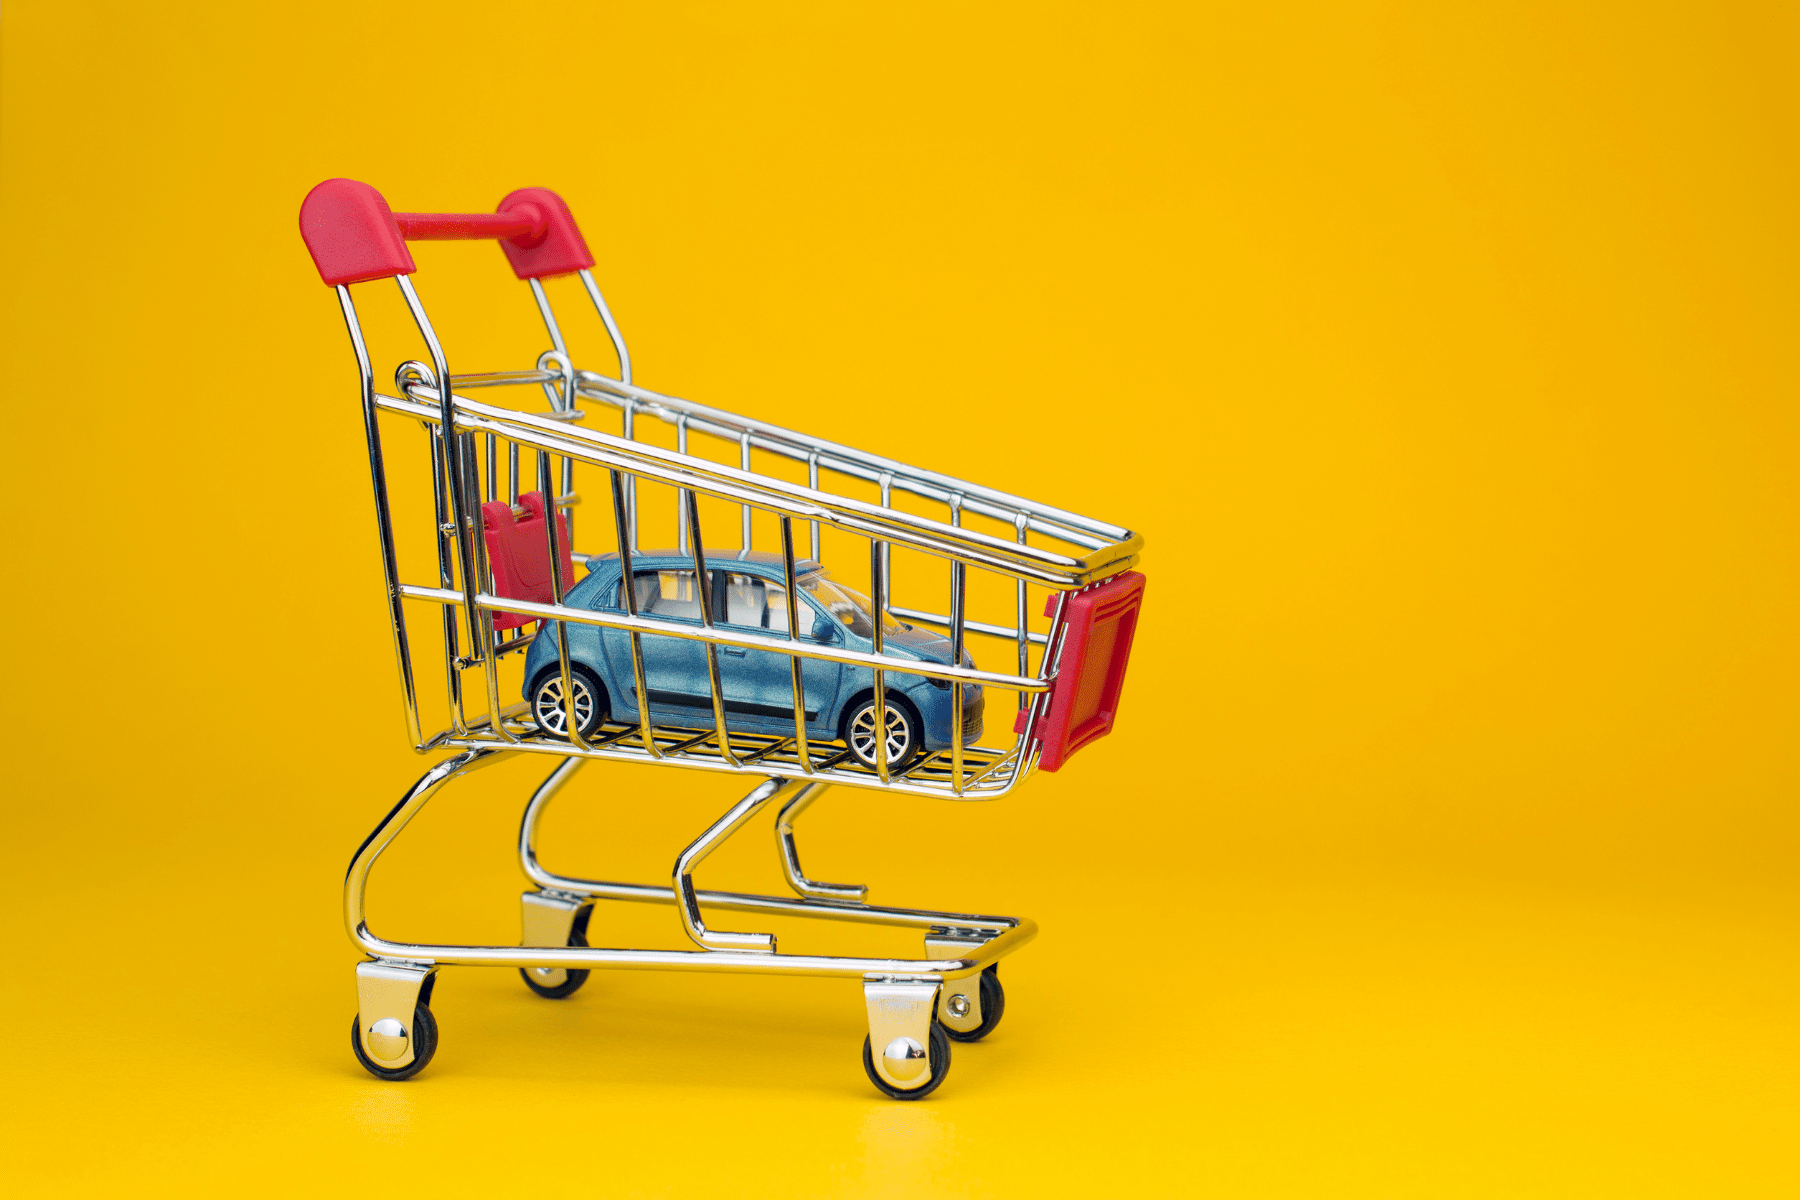 Blue toy car inside shopping cart in front of yellow backdrop